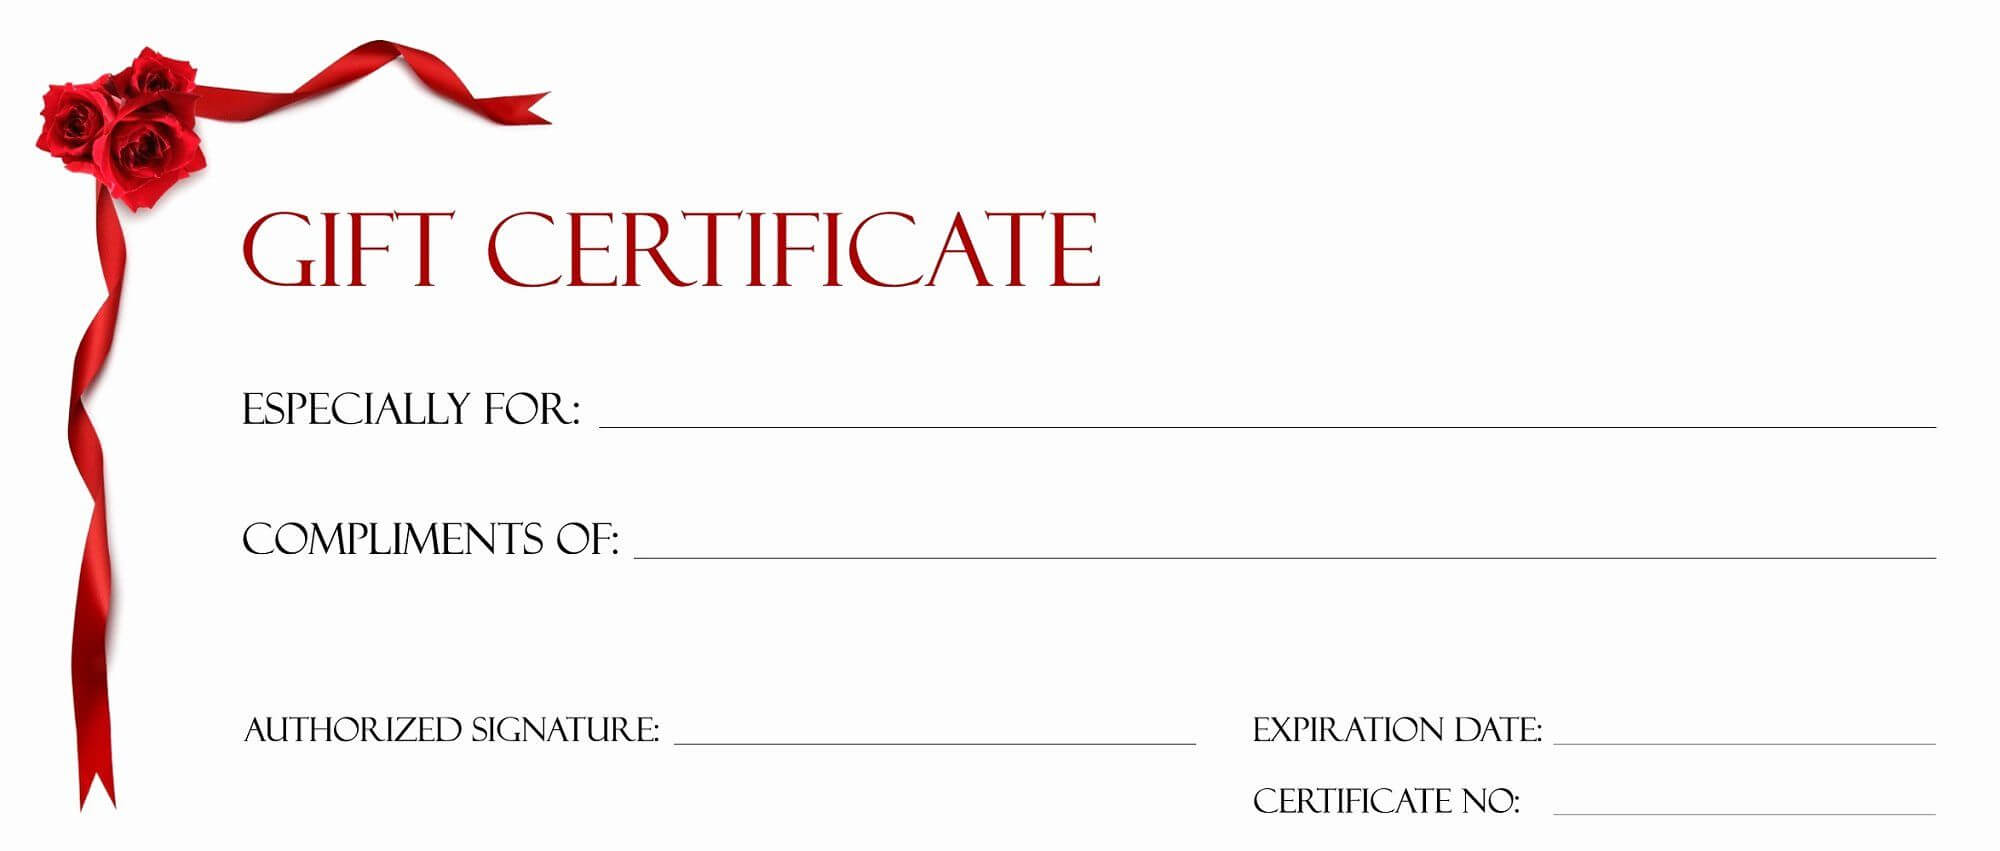 Free Gift Certificate Template Pages | Printablepedia Within Certificate Template For Pages